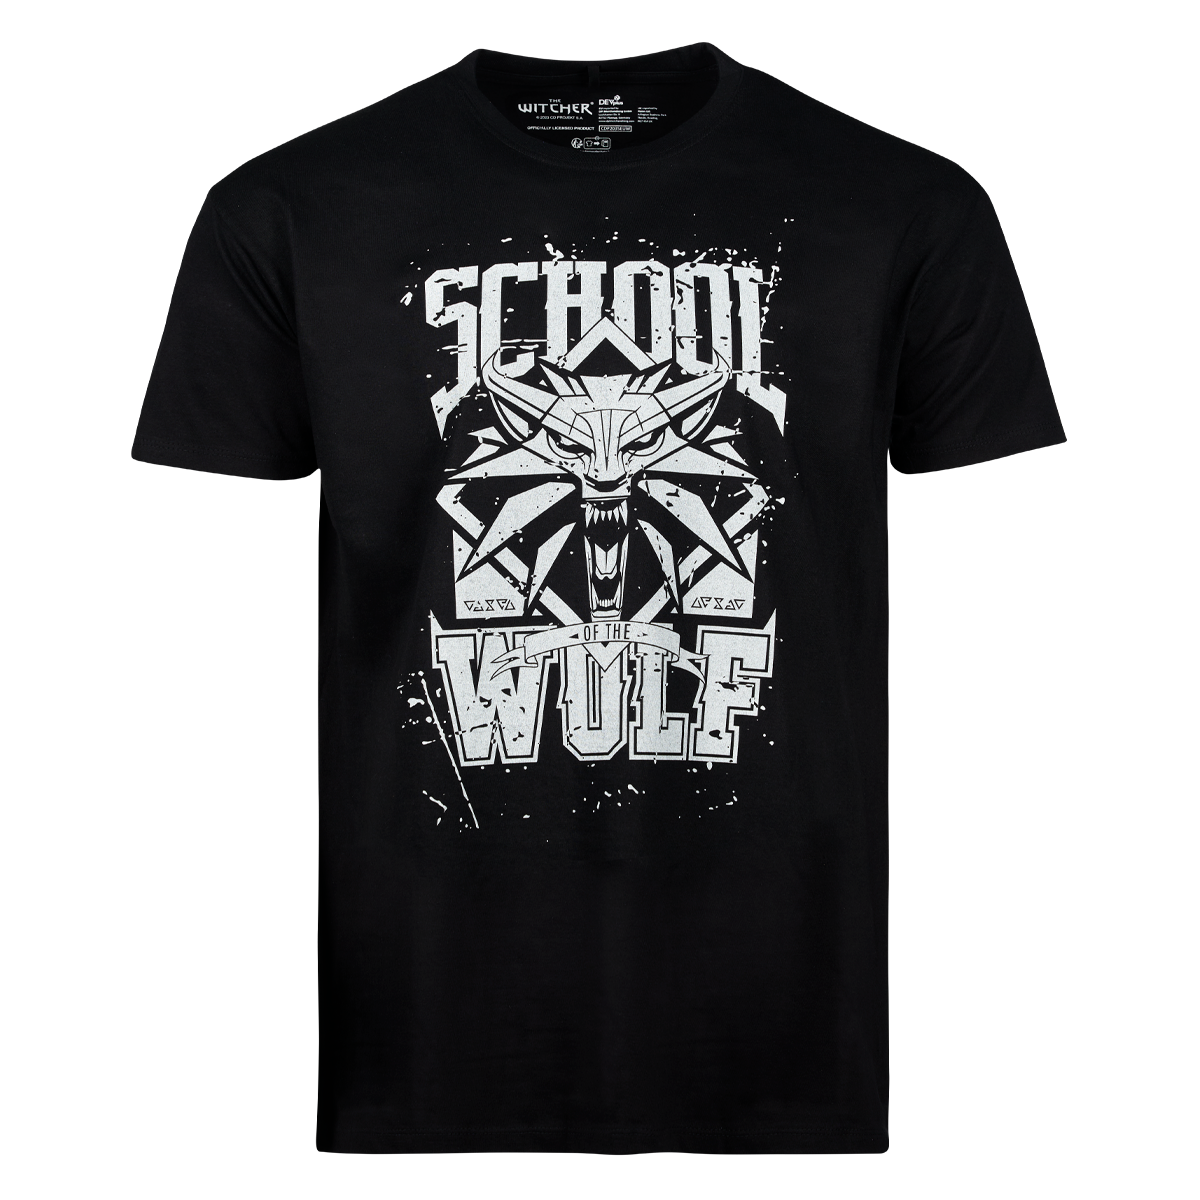 The Witcher T-Shirt "School of the Wolf" Black L Cover